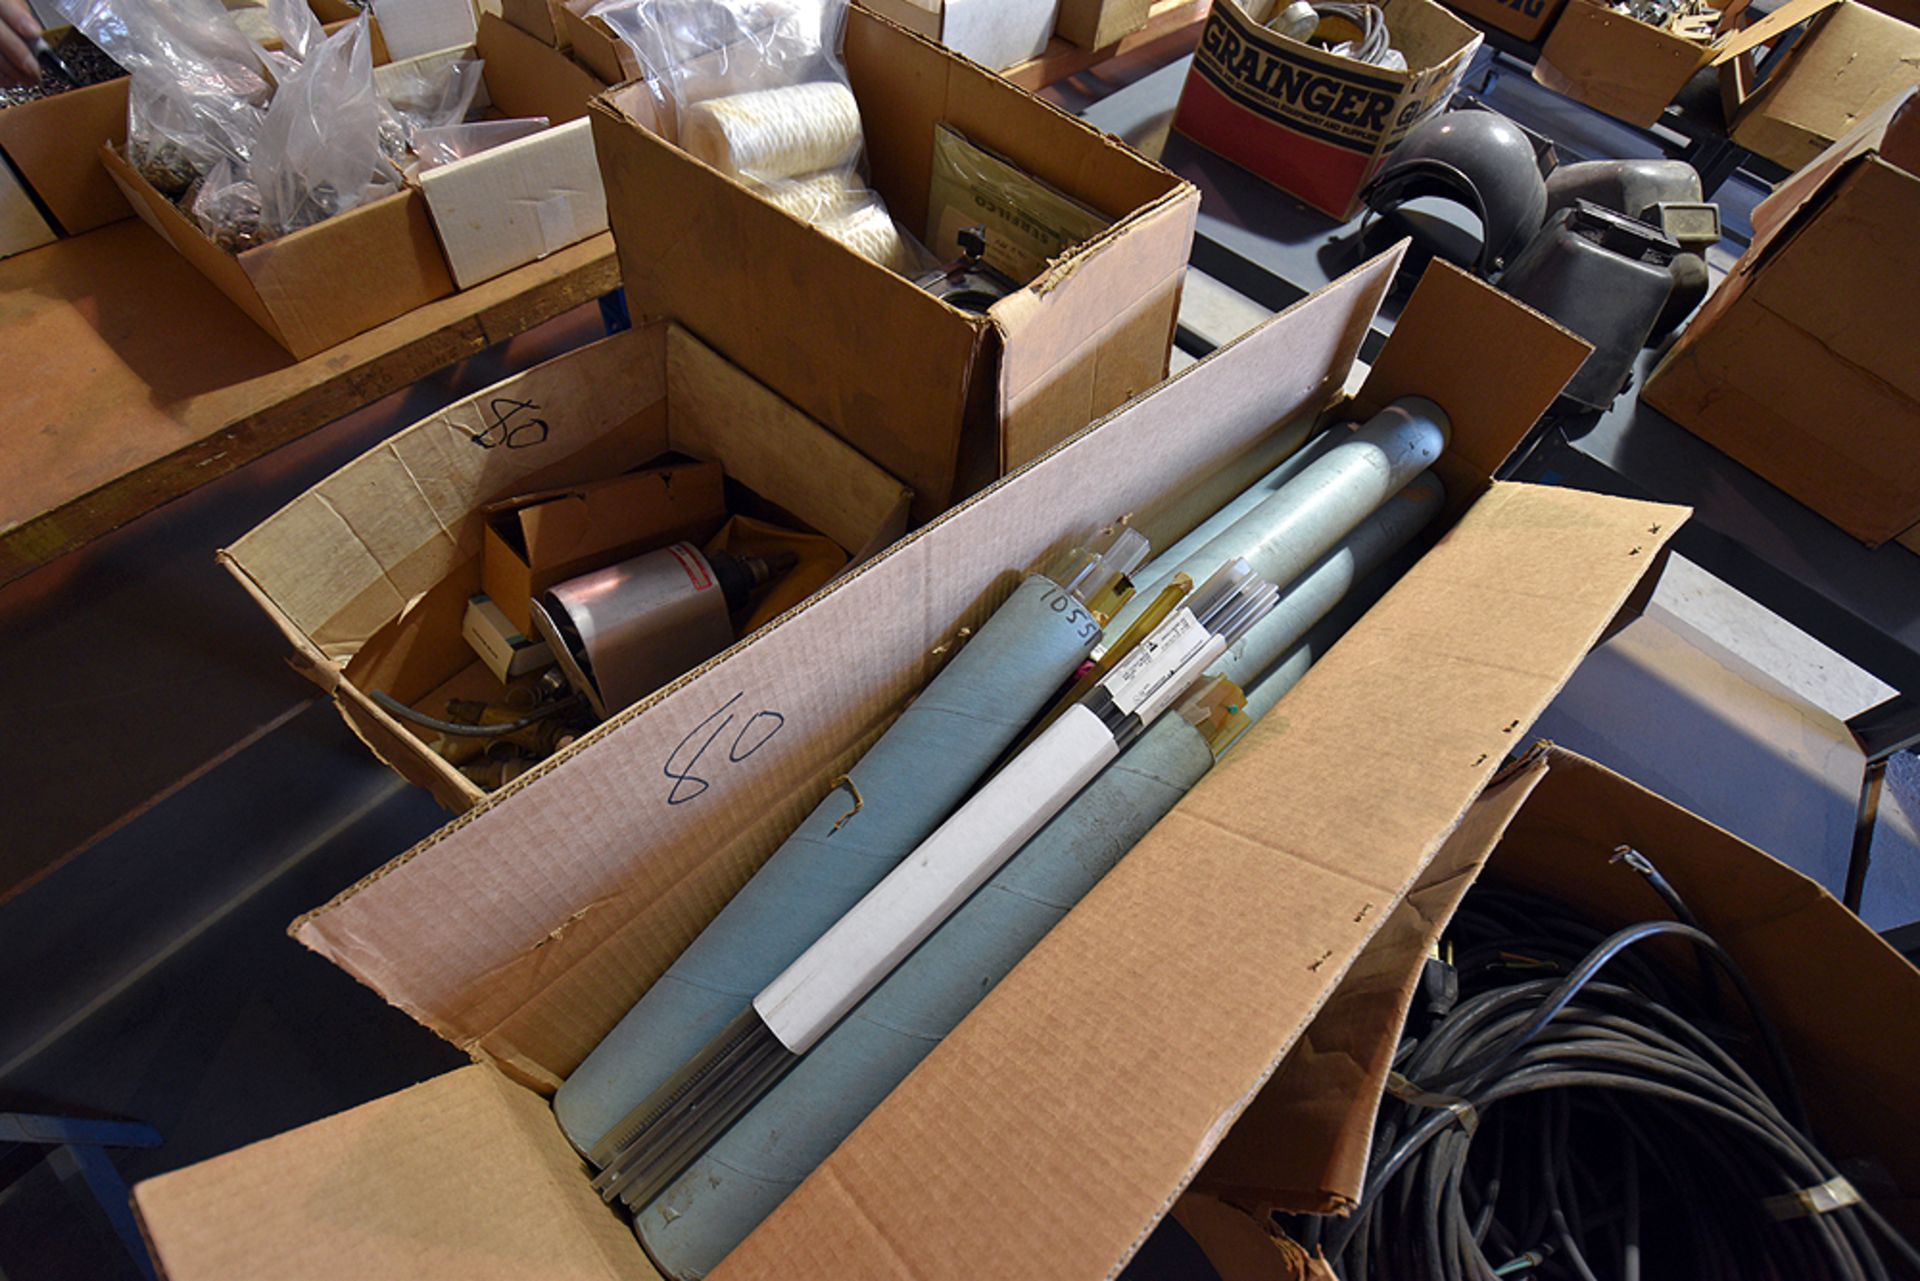 Contents of 6 tables consisting of: welding accessories, Dayton heater, Wire etc. - Image 4 of 8